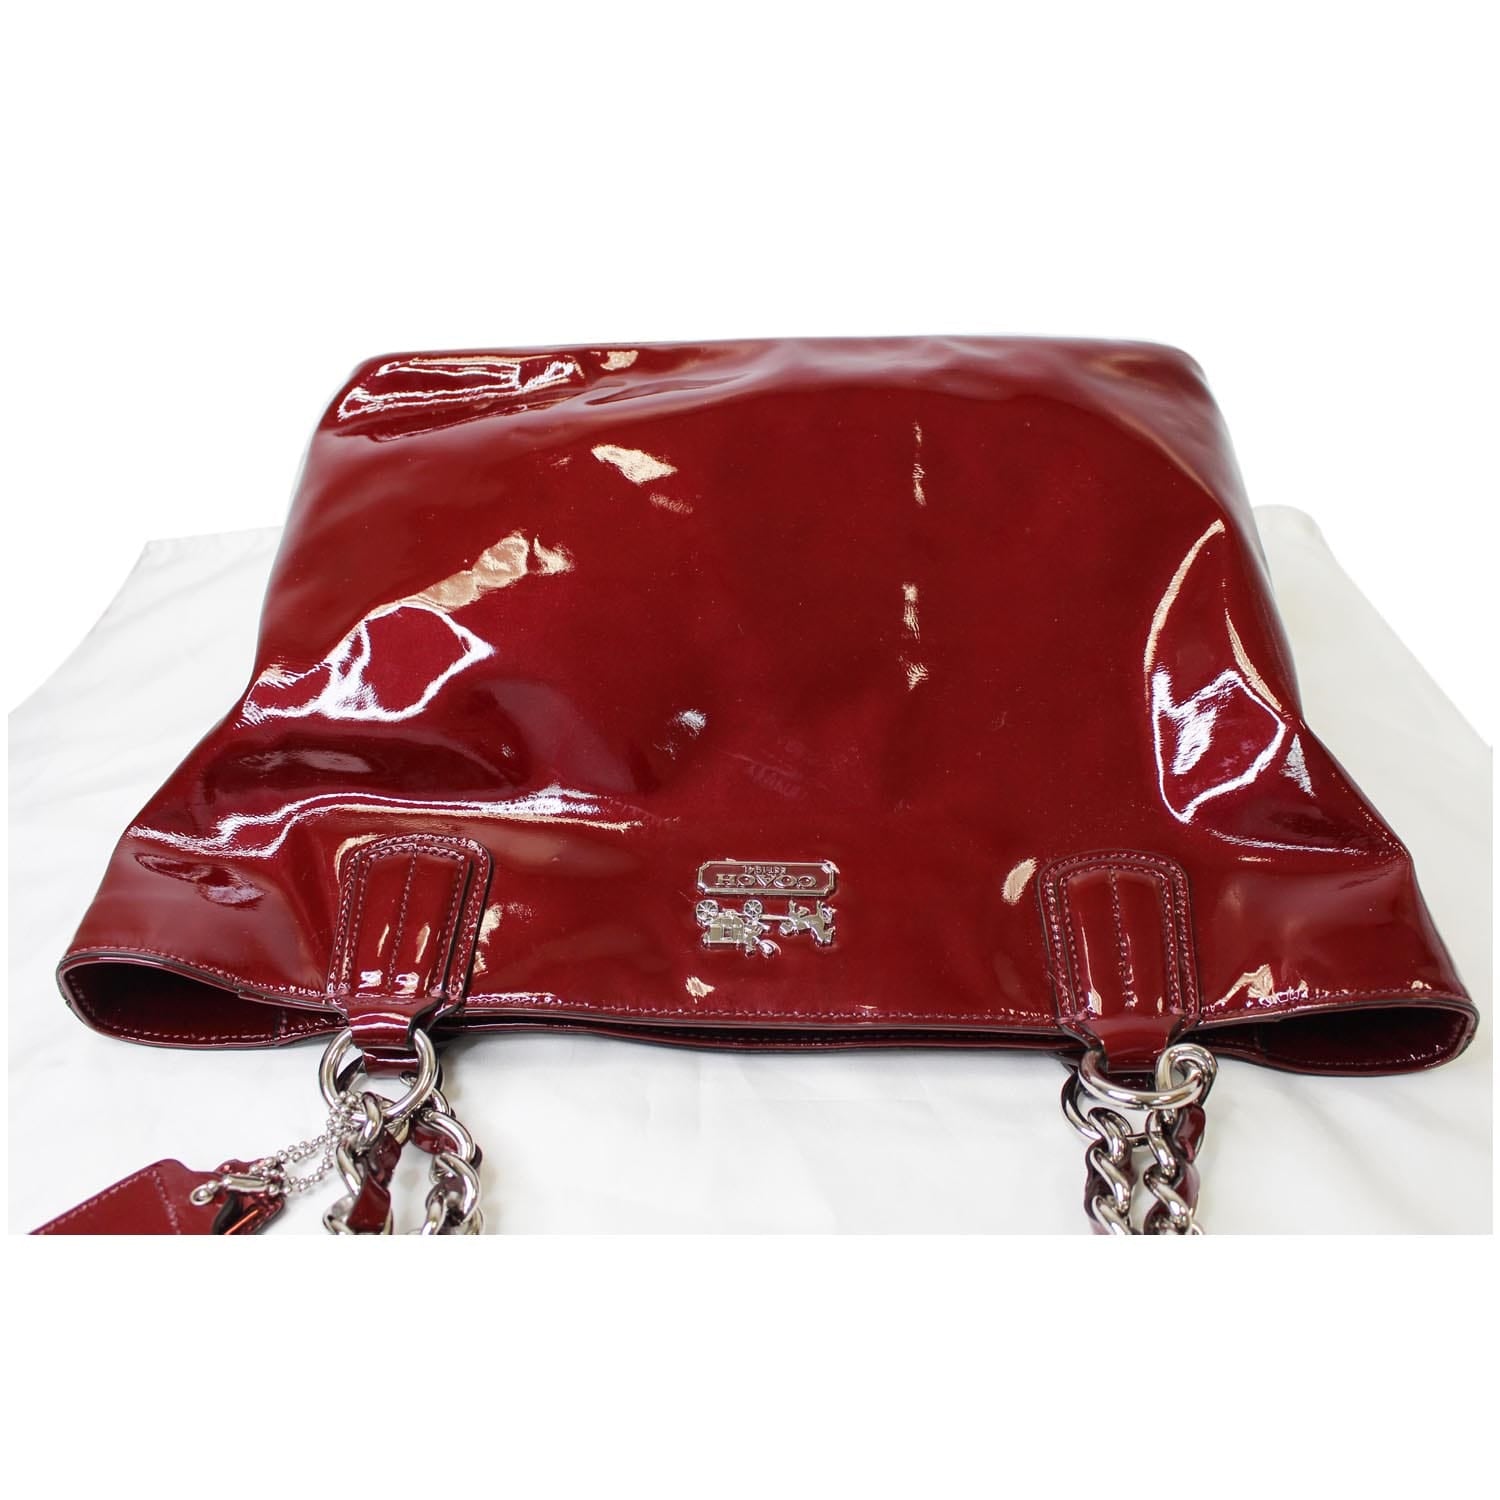 Ruby Red Patent Leather Tote Bag